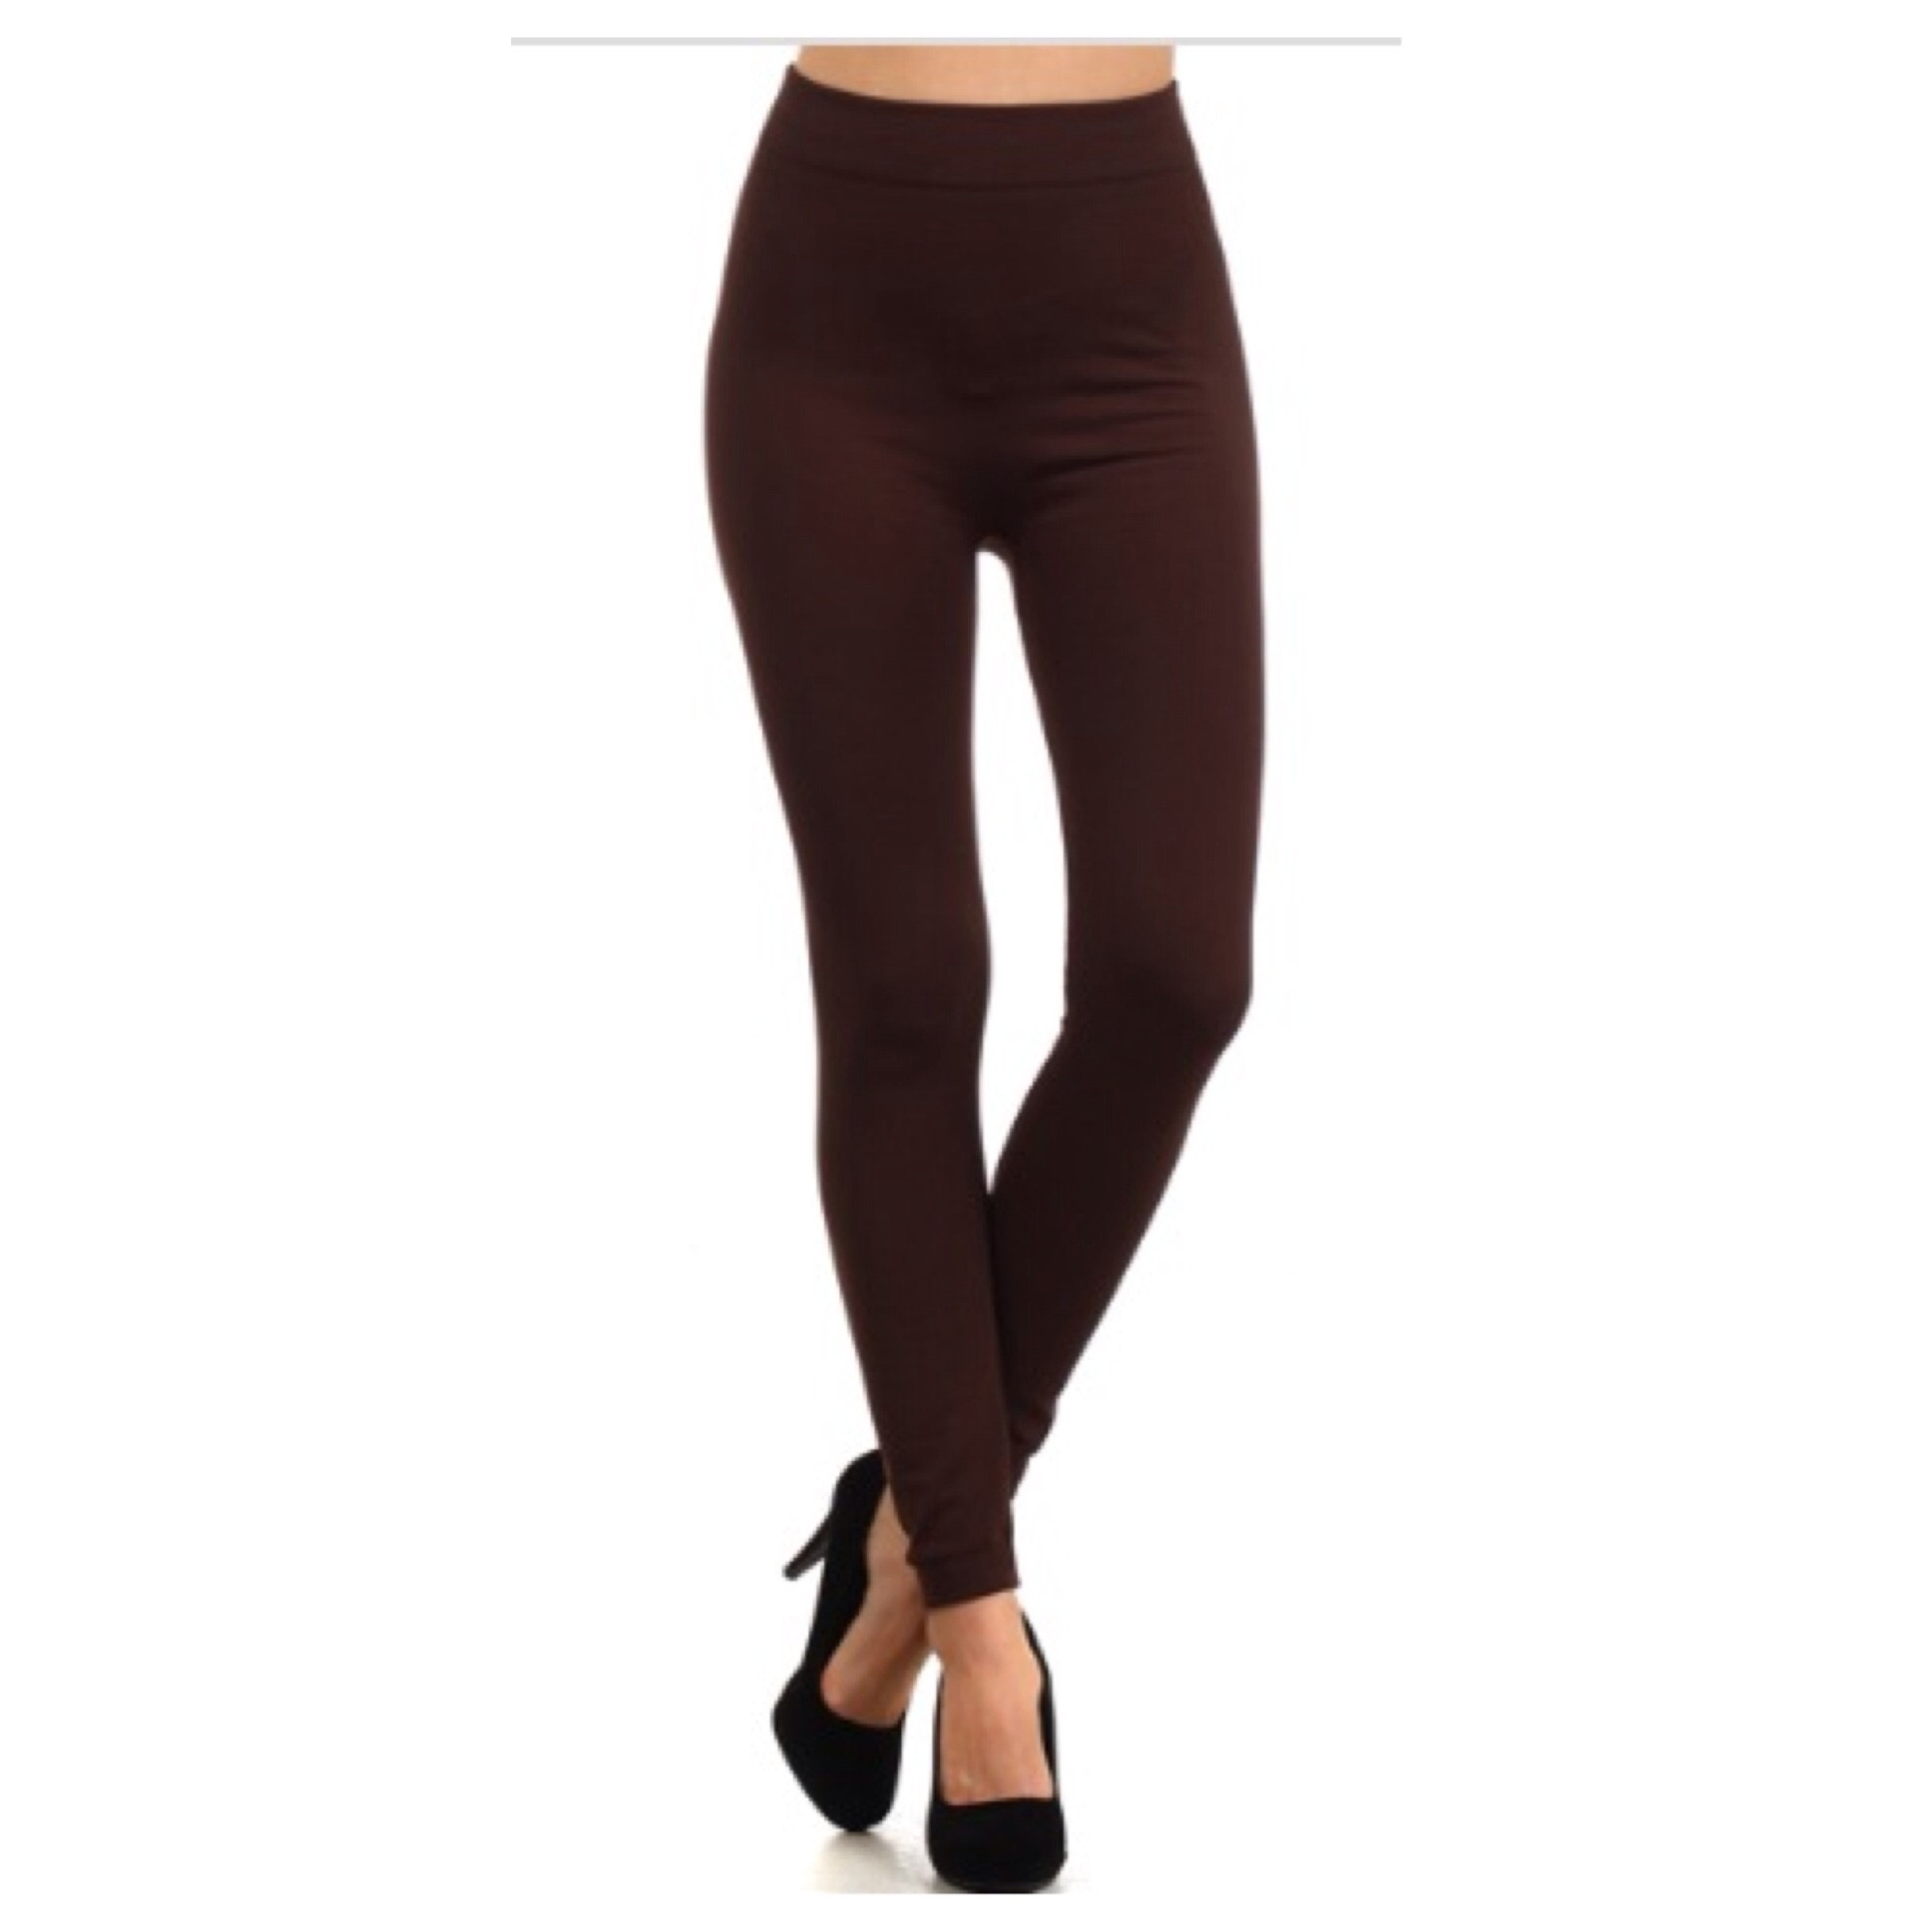 in style fleece lined solid coffee brown leggings ocsznuh